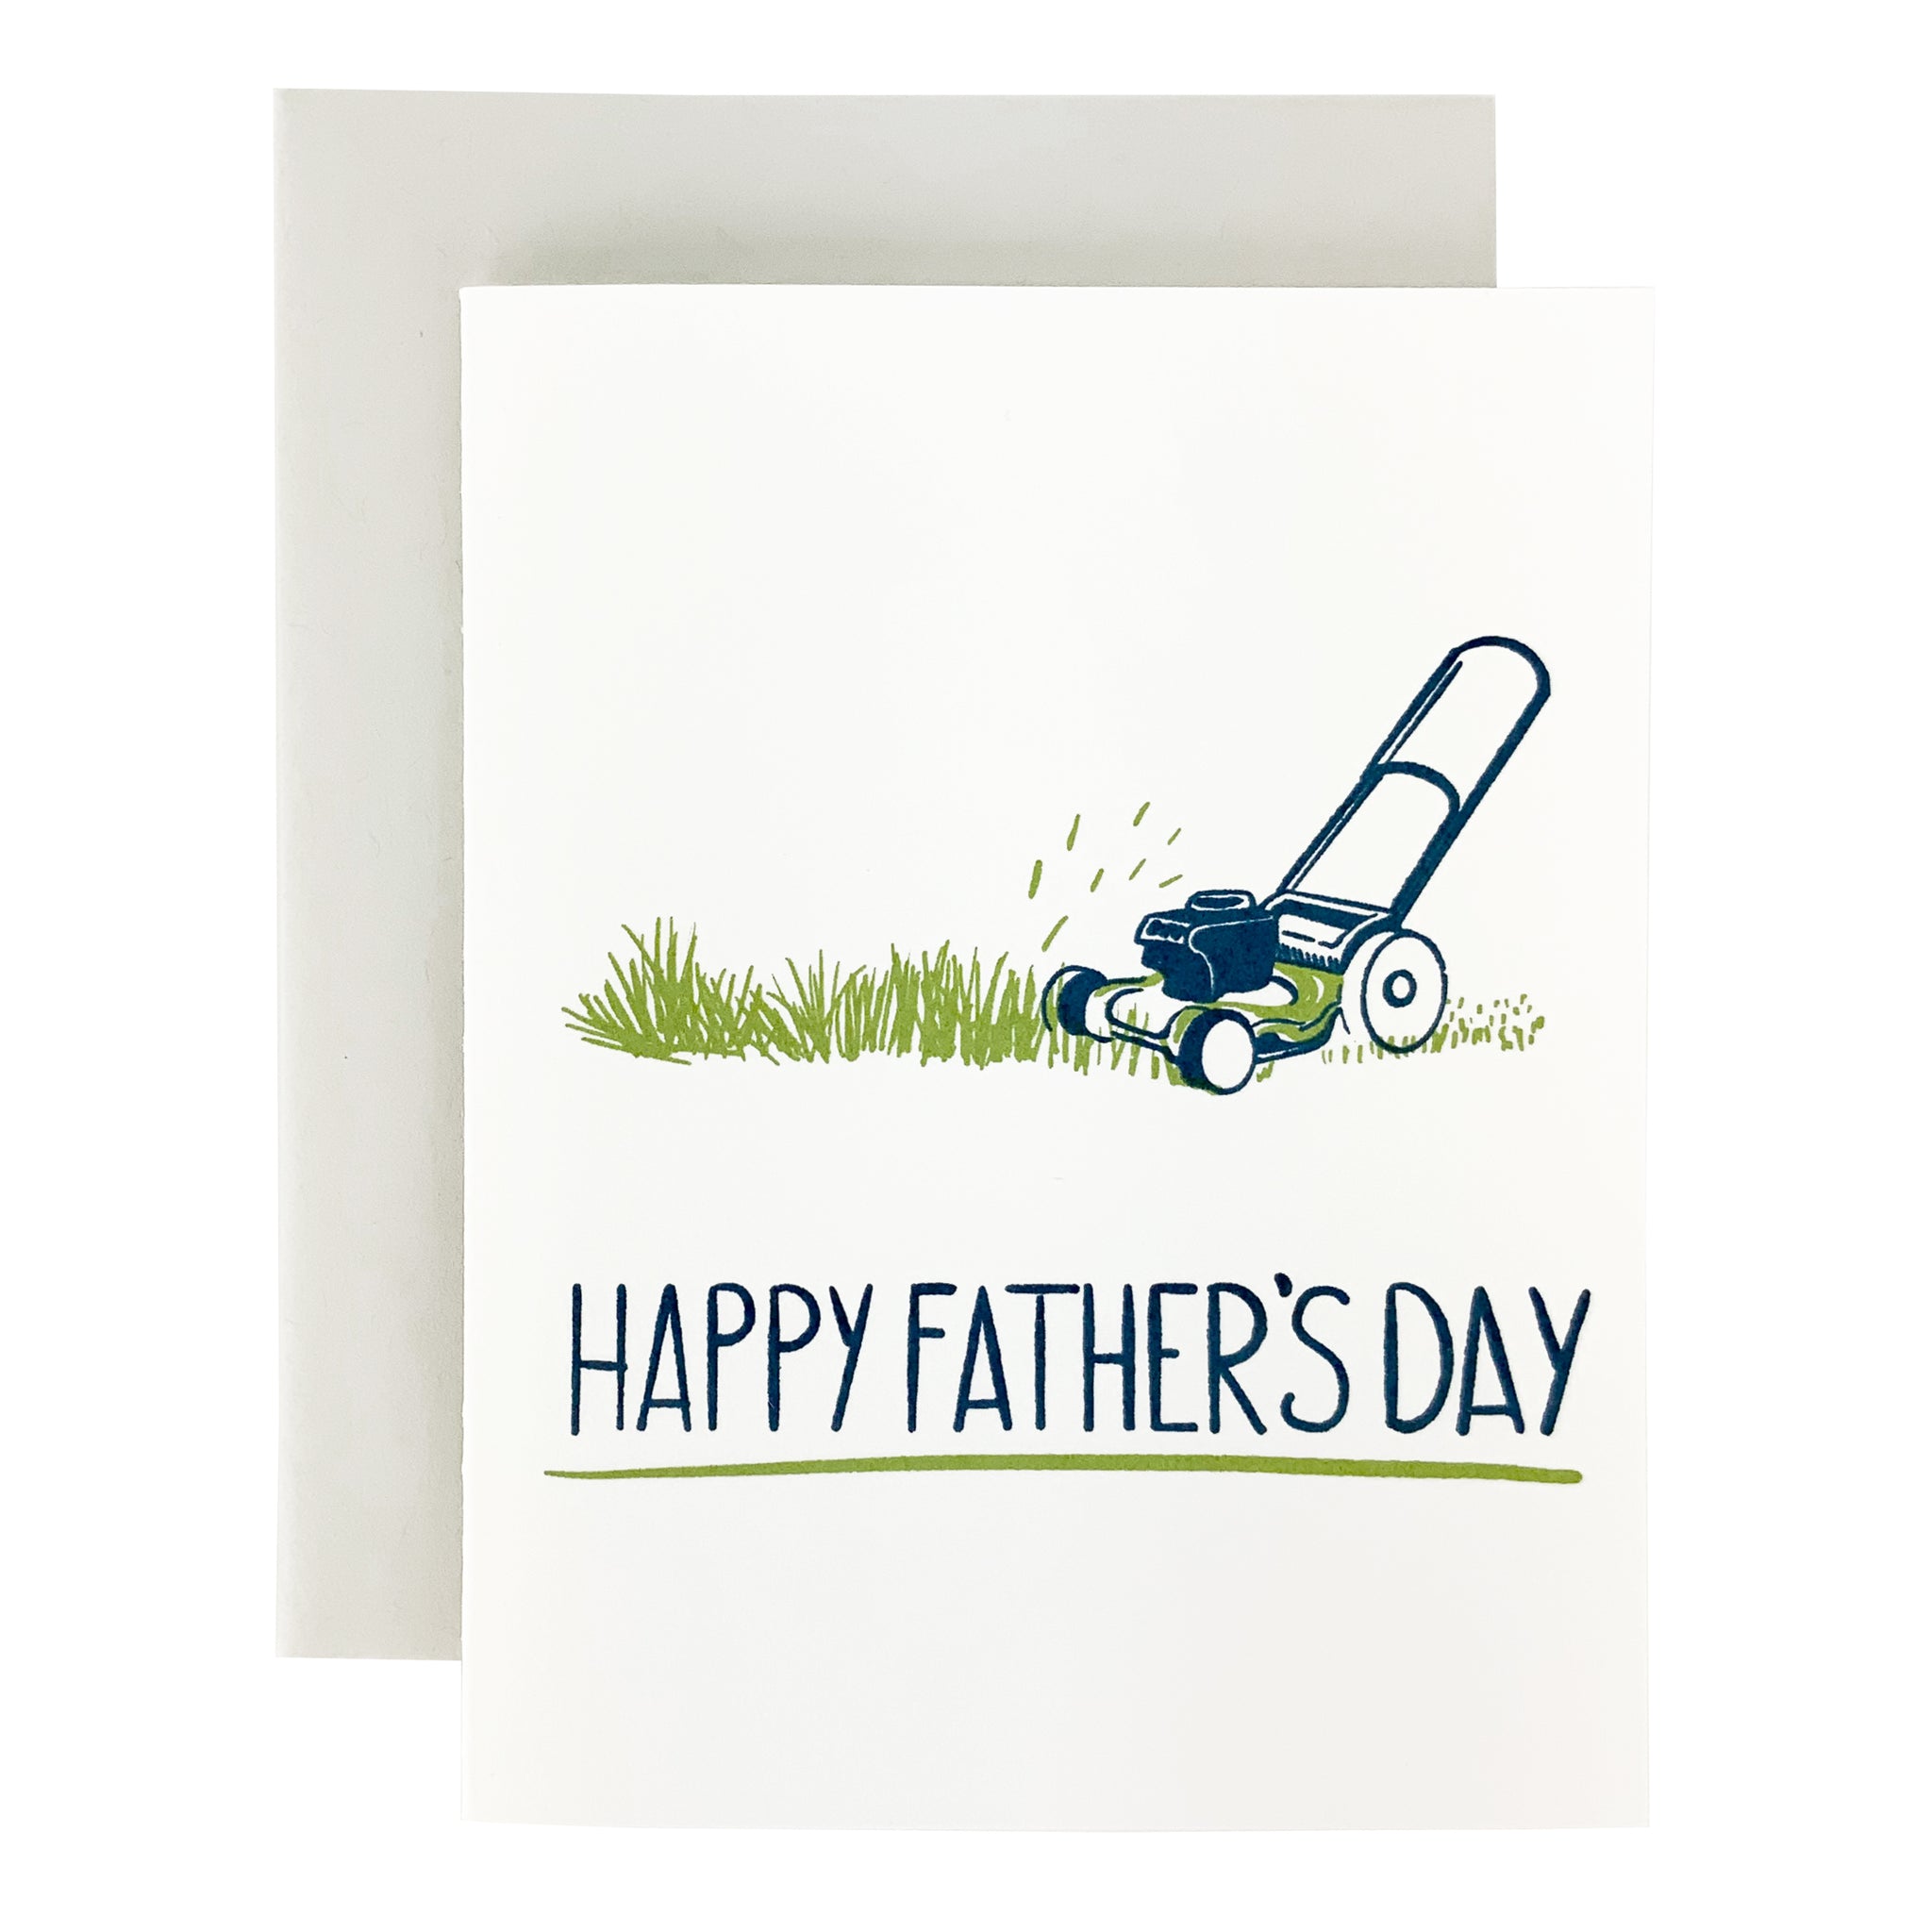 Happy Father's Day Lawn Mower Card